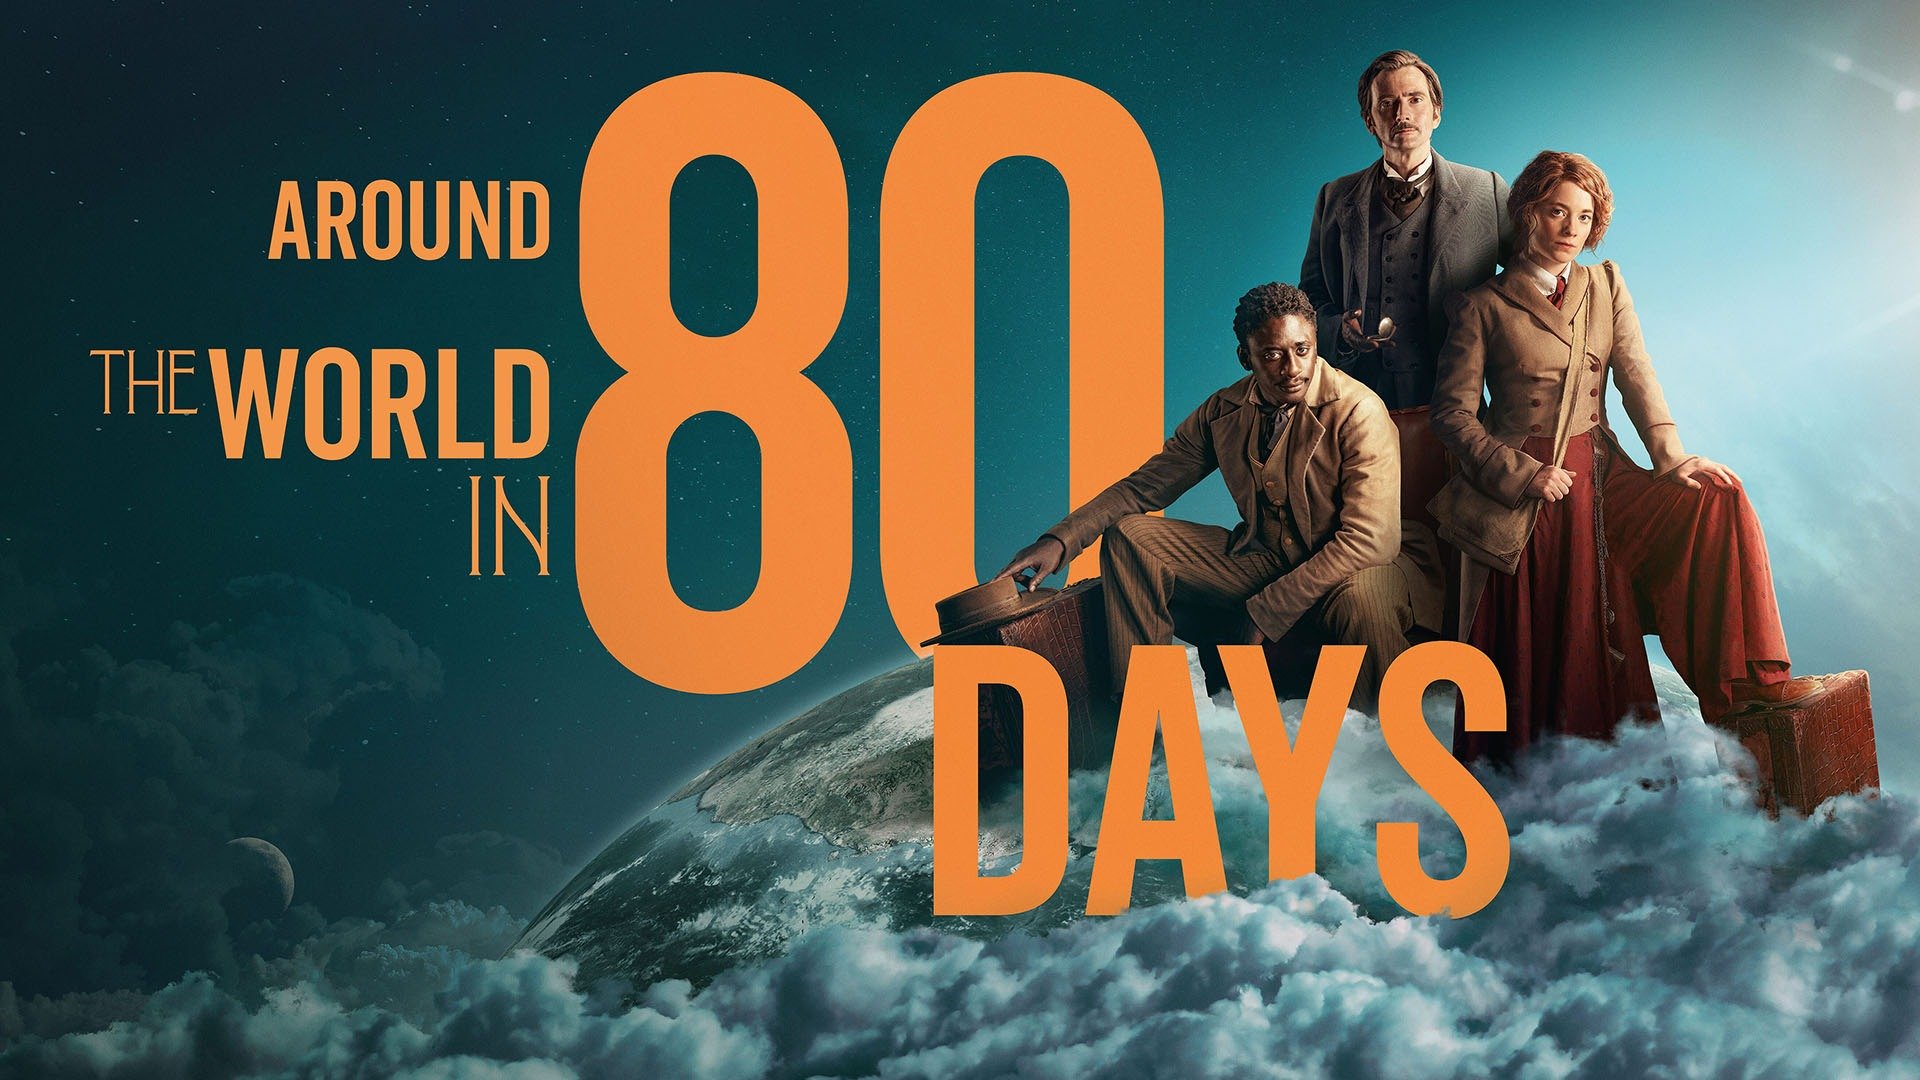 32-facts-about-the-movie-around-the-world-in-80-days